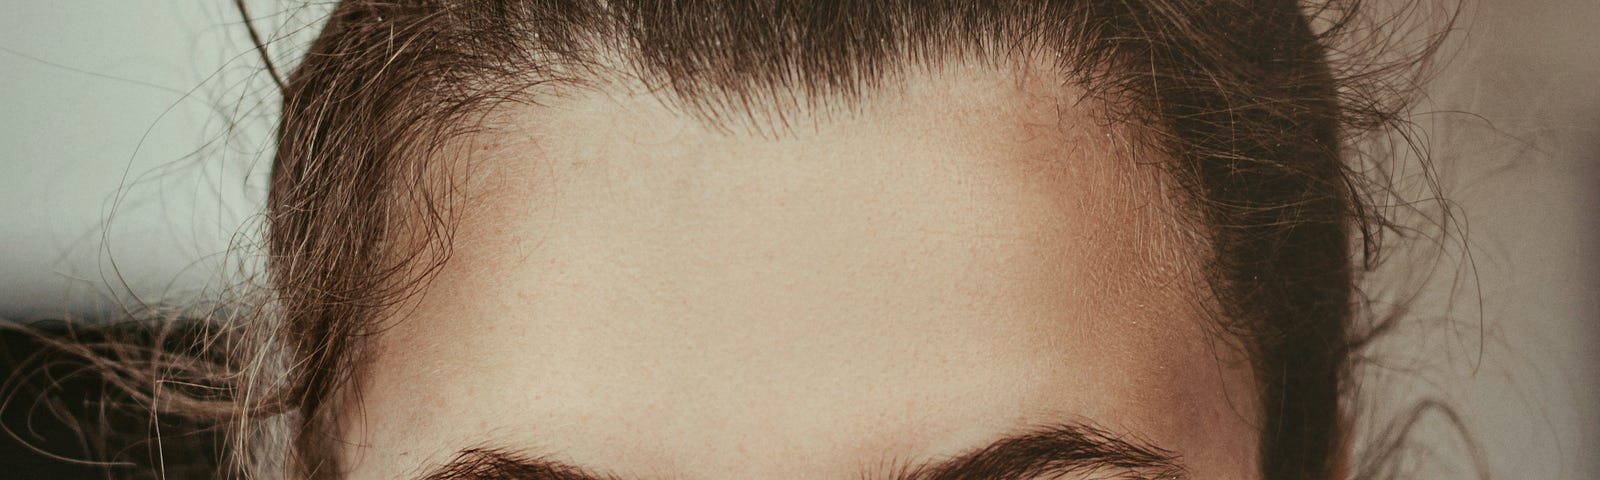 A woman’s face, freckles, hair up